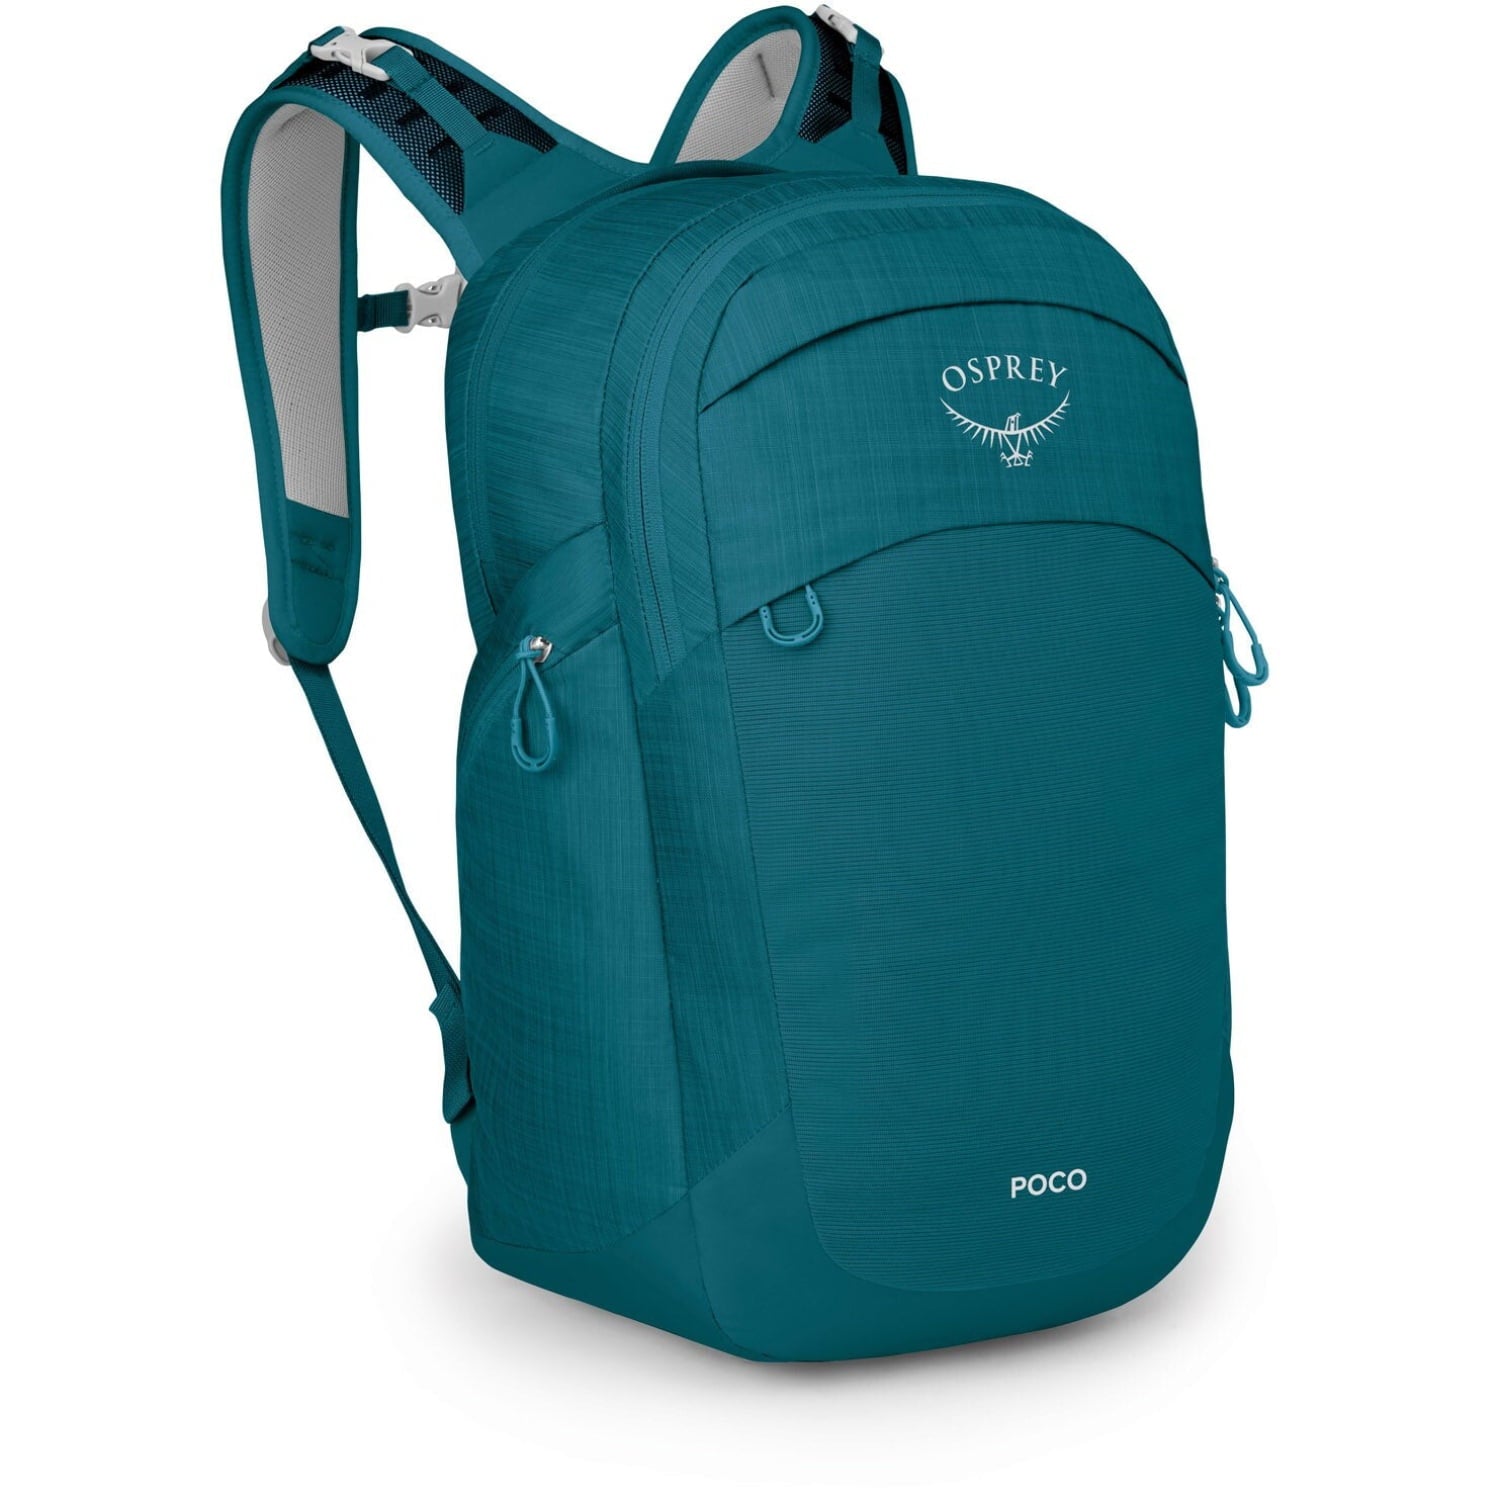 Osprey Poco Changing Pack in deep peyto front side view